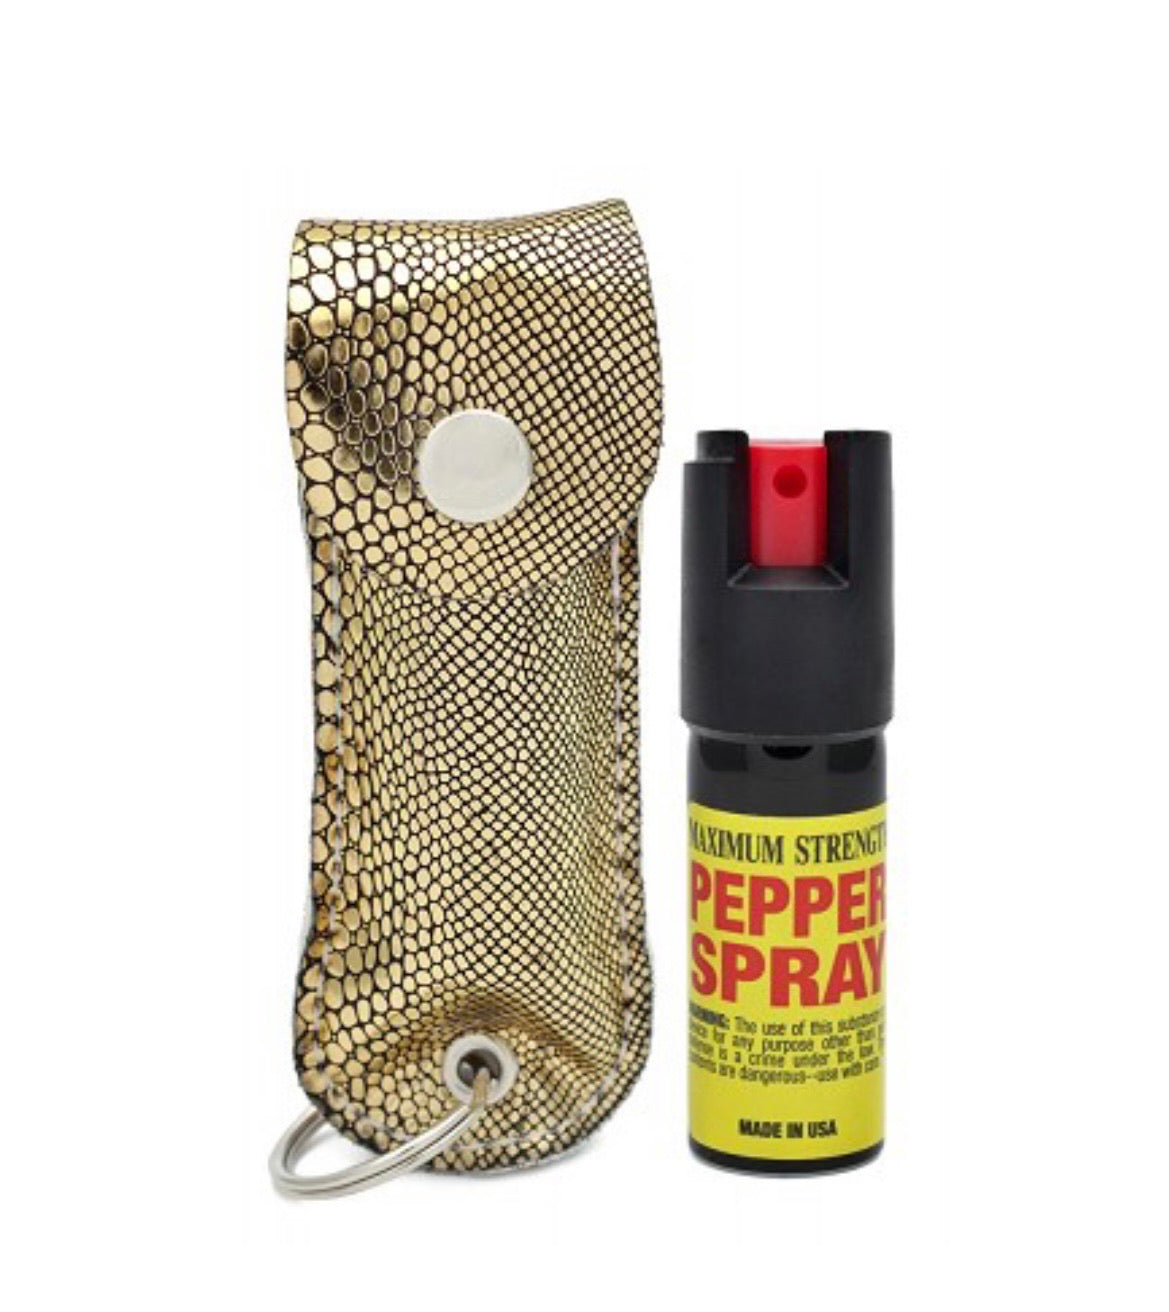 Soft Leather Pepper Spray Keychain Only